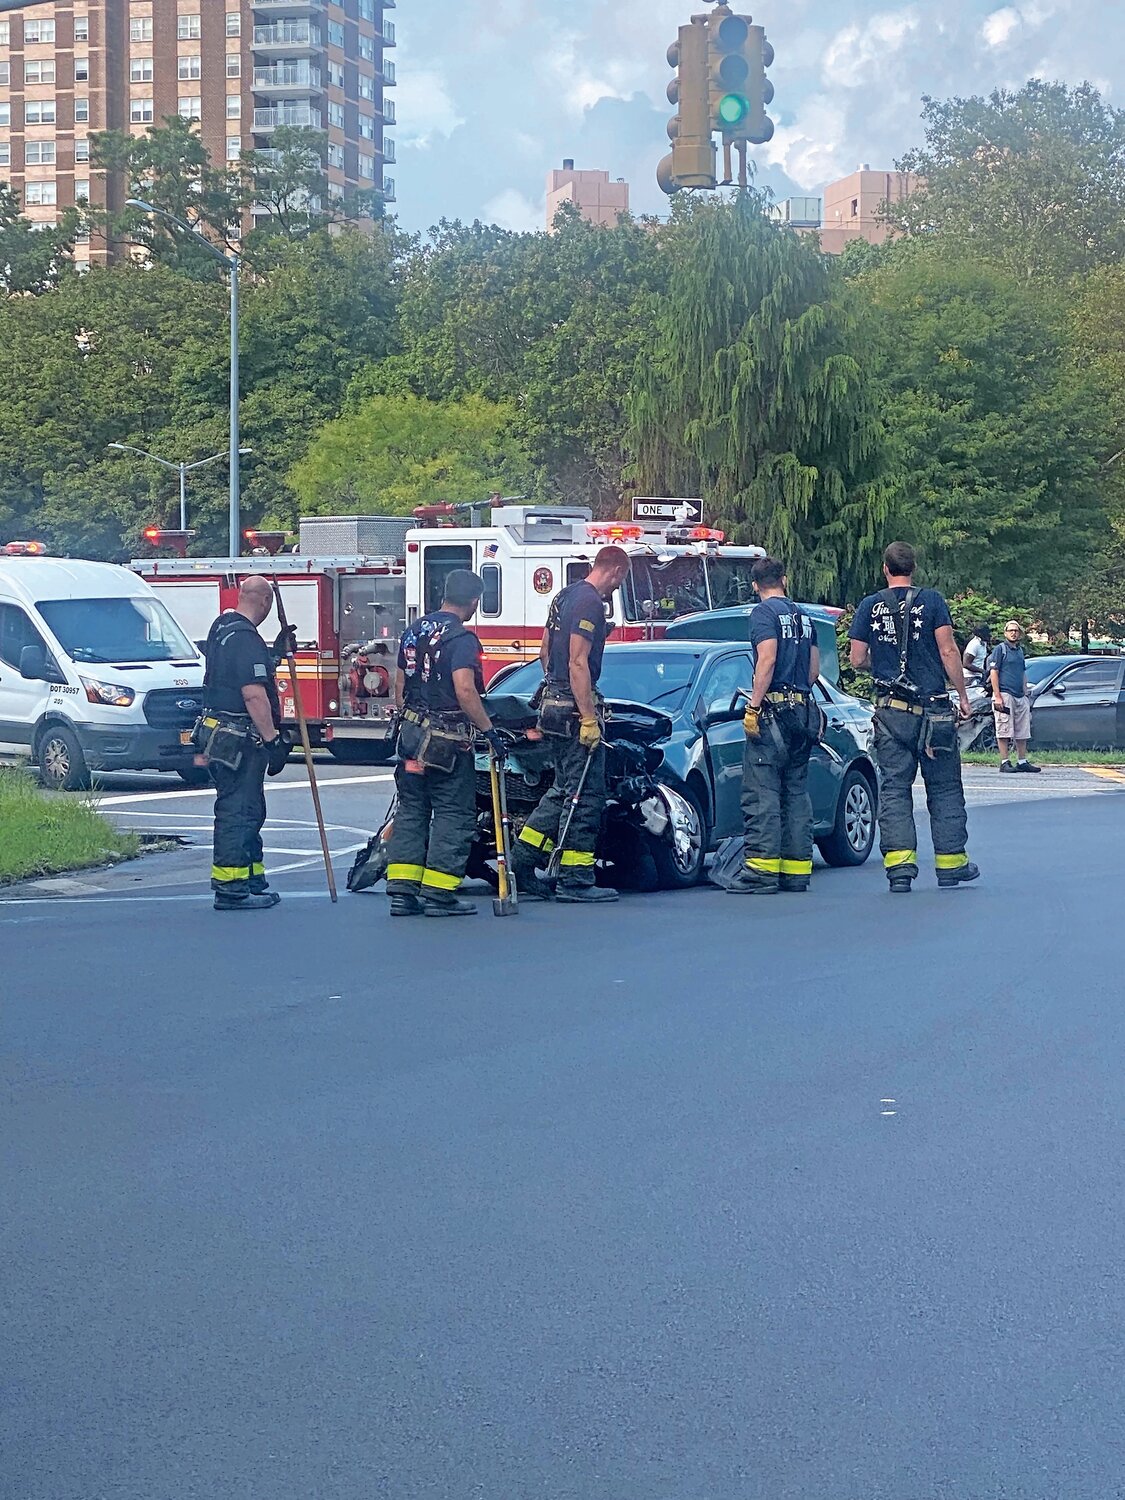 This sedan’s front end was crushed in a crash on Mosholu Parkway and Sedgwick Avenue on Monday. Ambulances and firefighters showed up to the scene. It is unknown if anyone was injured.